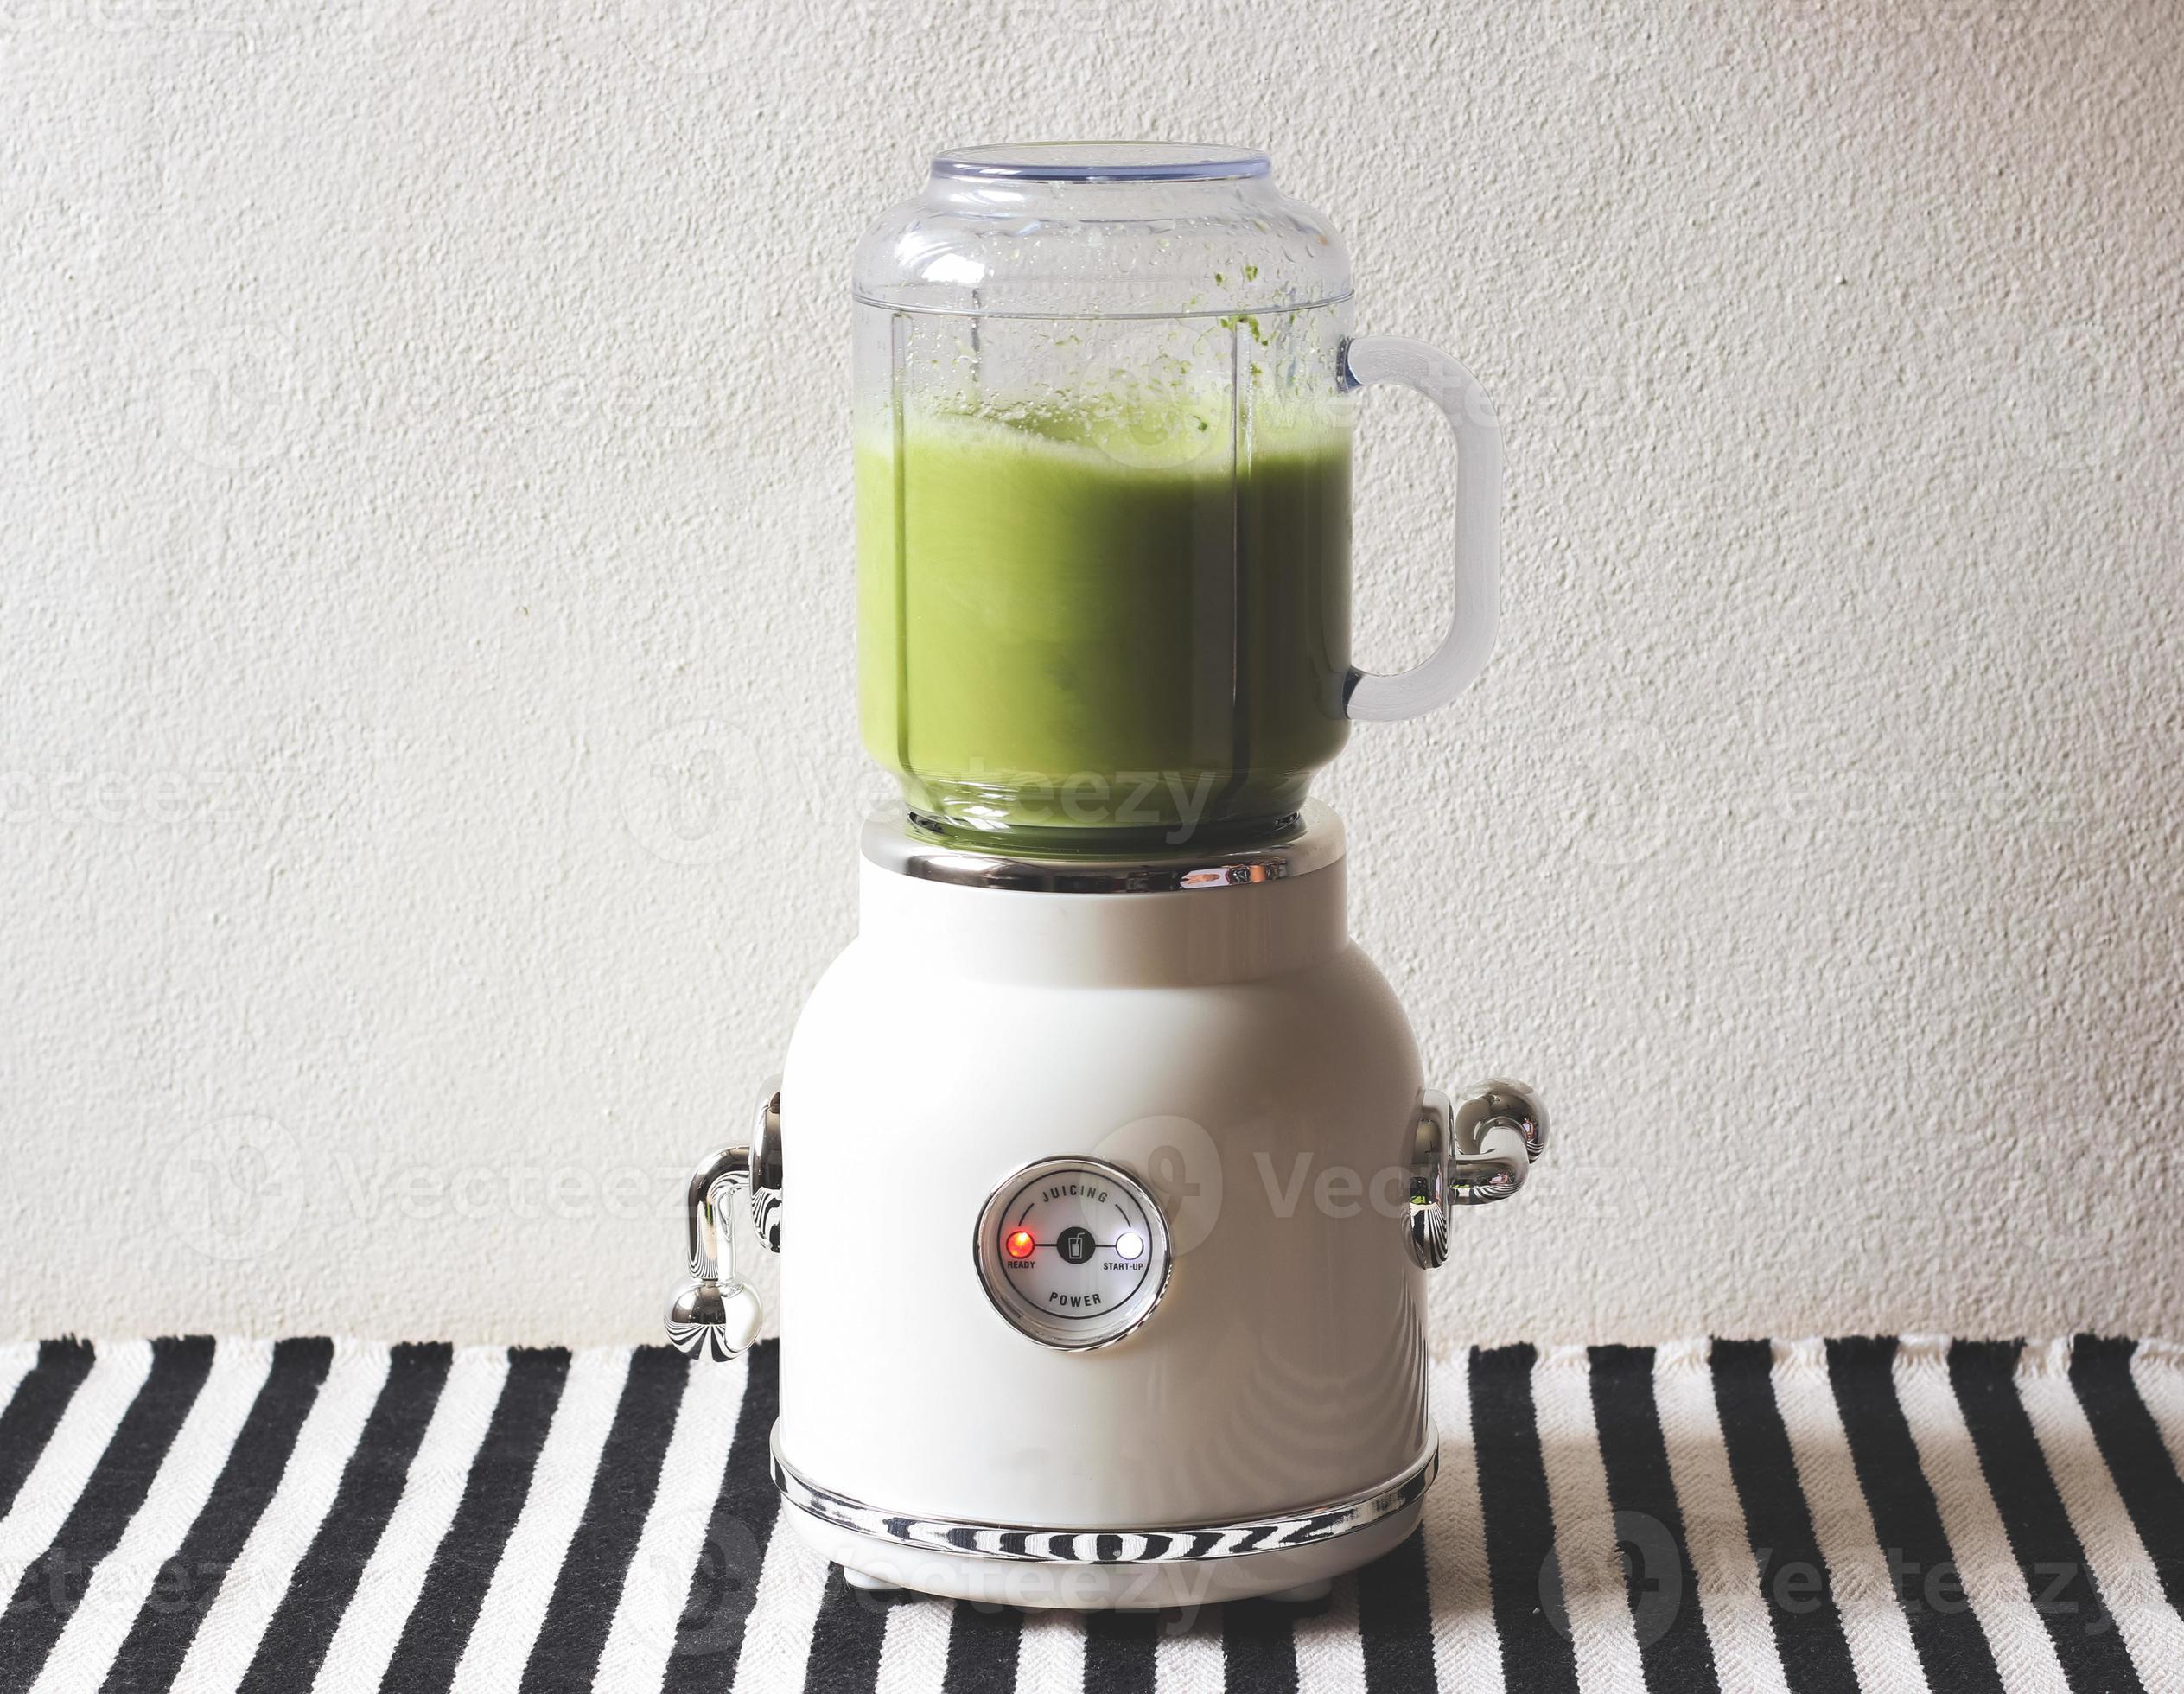 https://static.vecteezy.com/system/resources/previews/010/847/980/large_2x/white-vintage-blender-or-smoothie-maker-machine-working-on-making-green-smoothie-on-black-and-white-stripe-table-cloth-and-white-wall-healthy-drink-making-photo.jpg